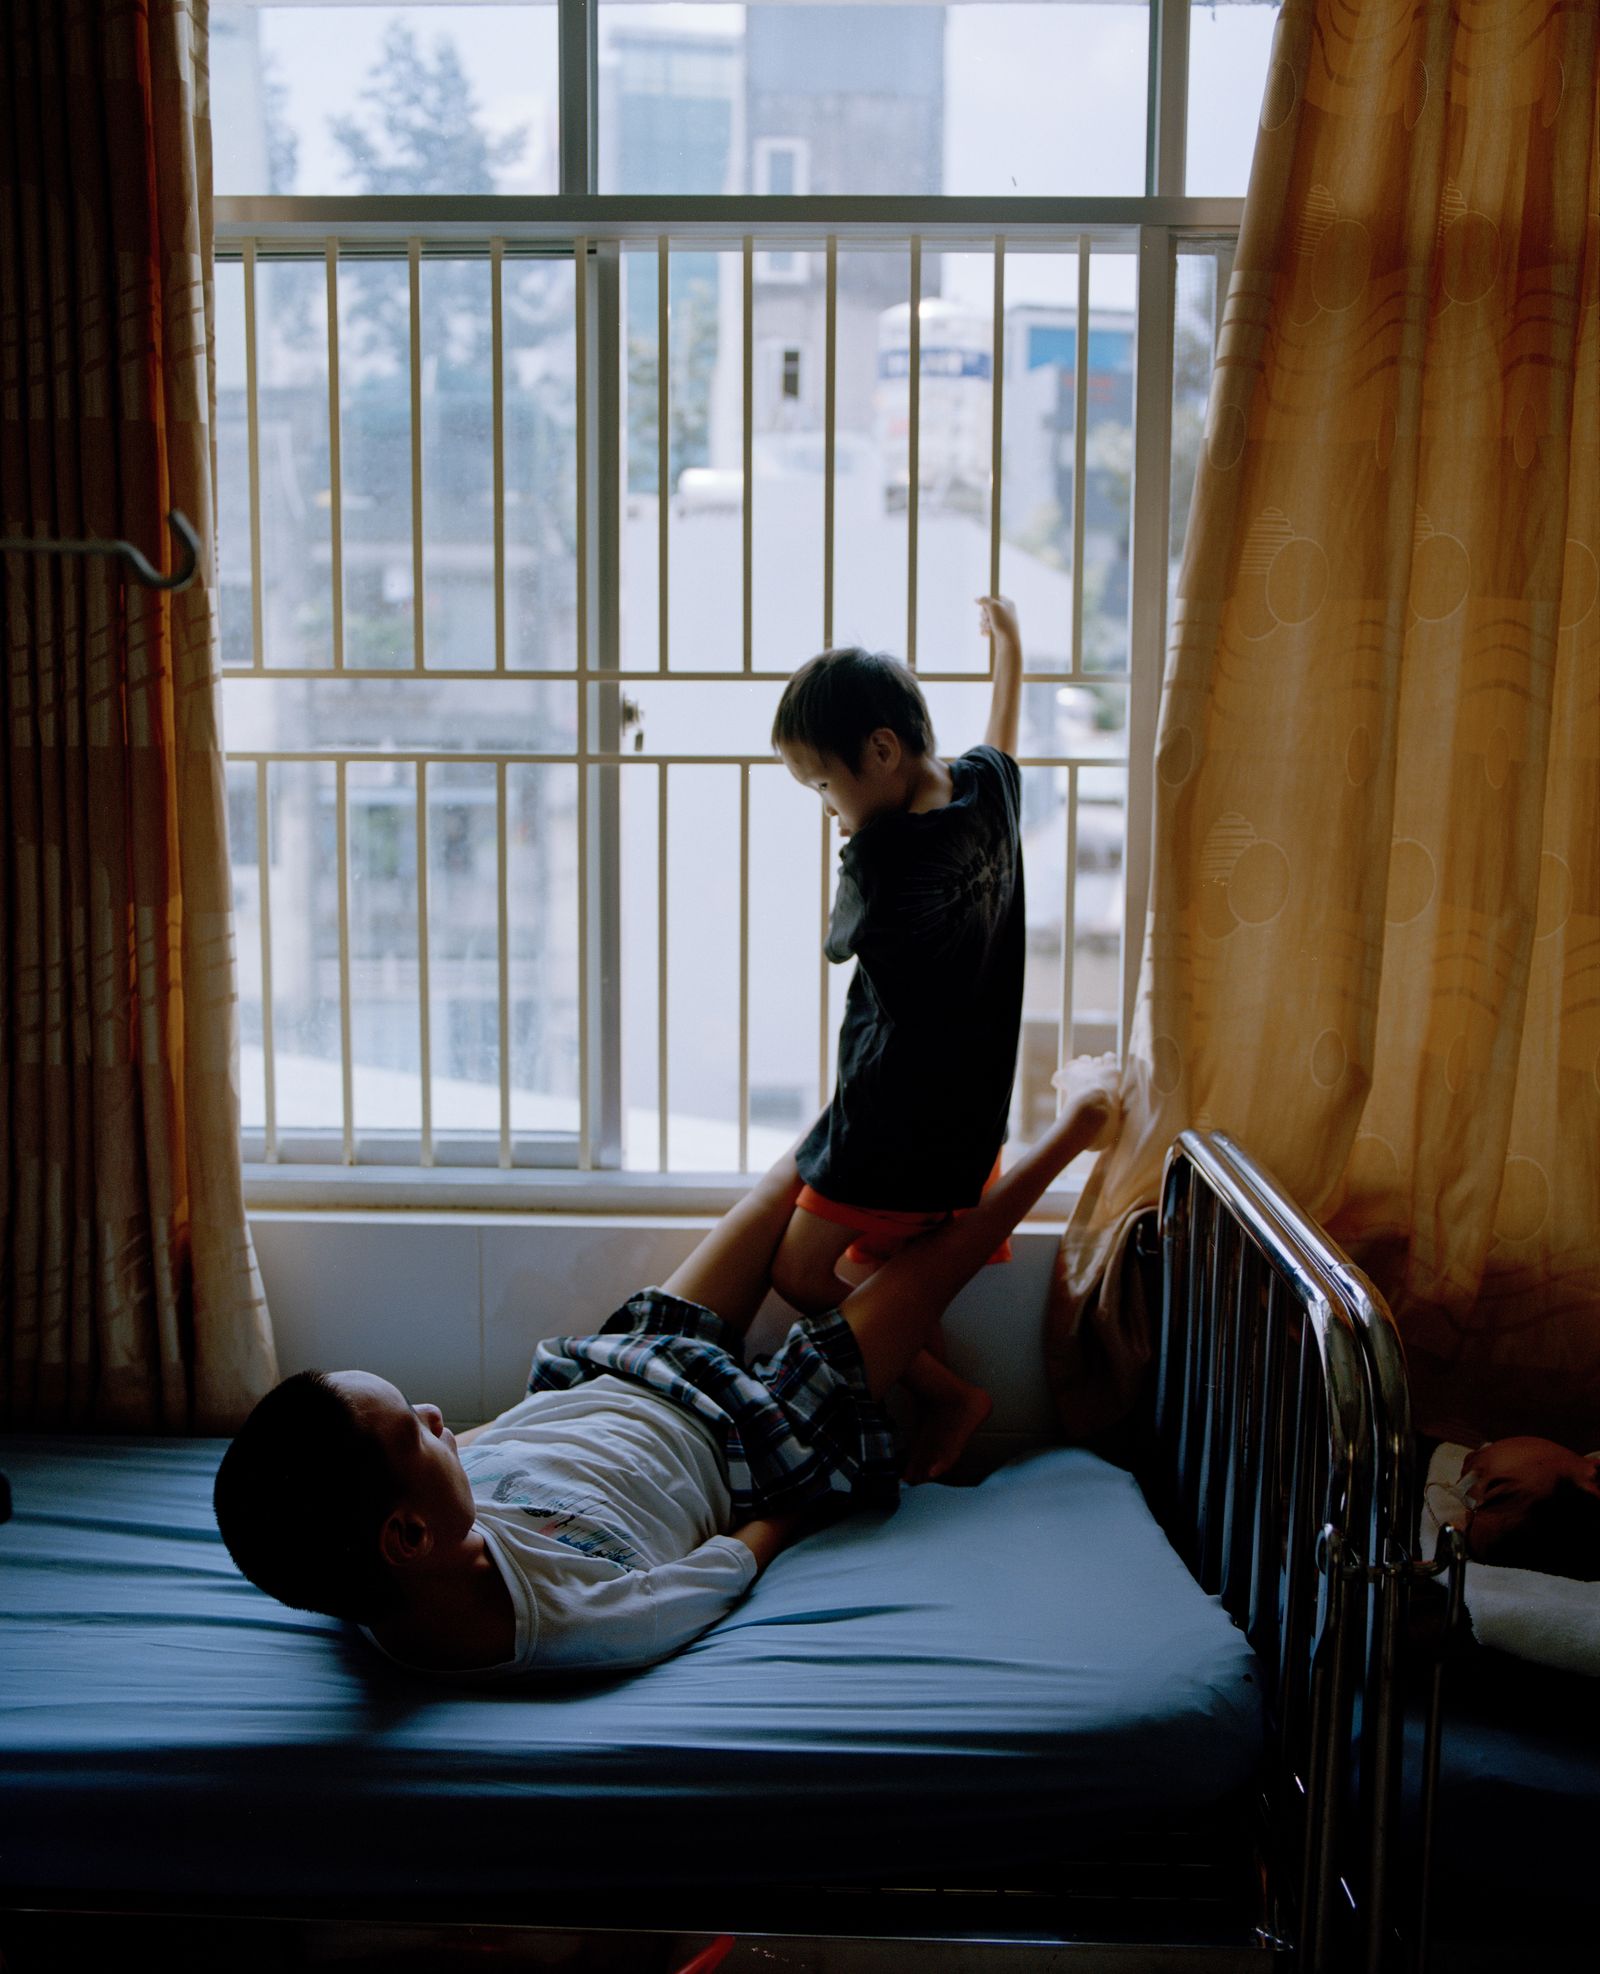 © Tobias Nicolai - Image from the The inheritance from the vietnam war photography project